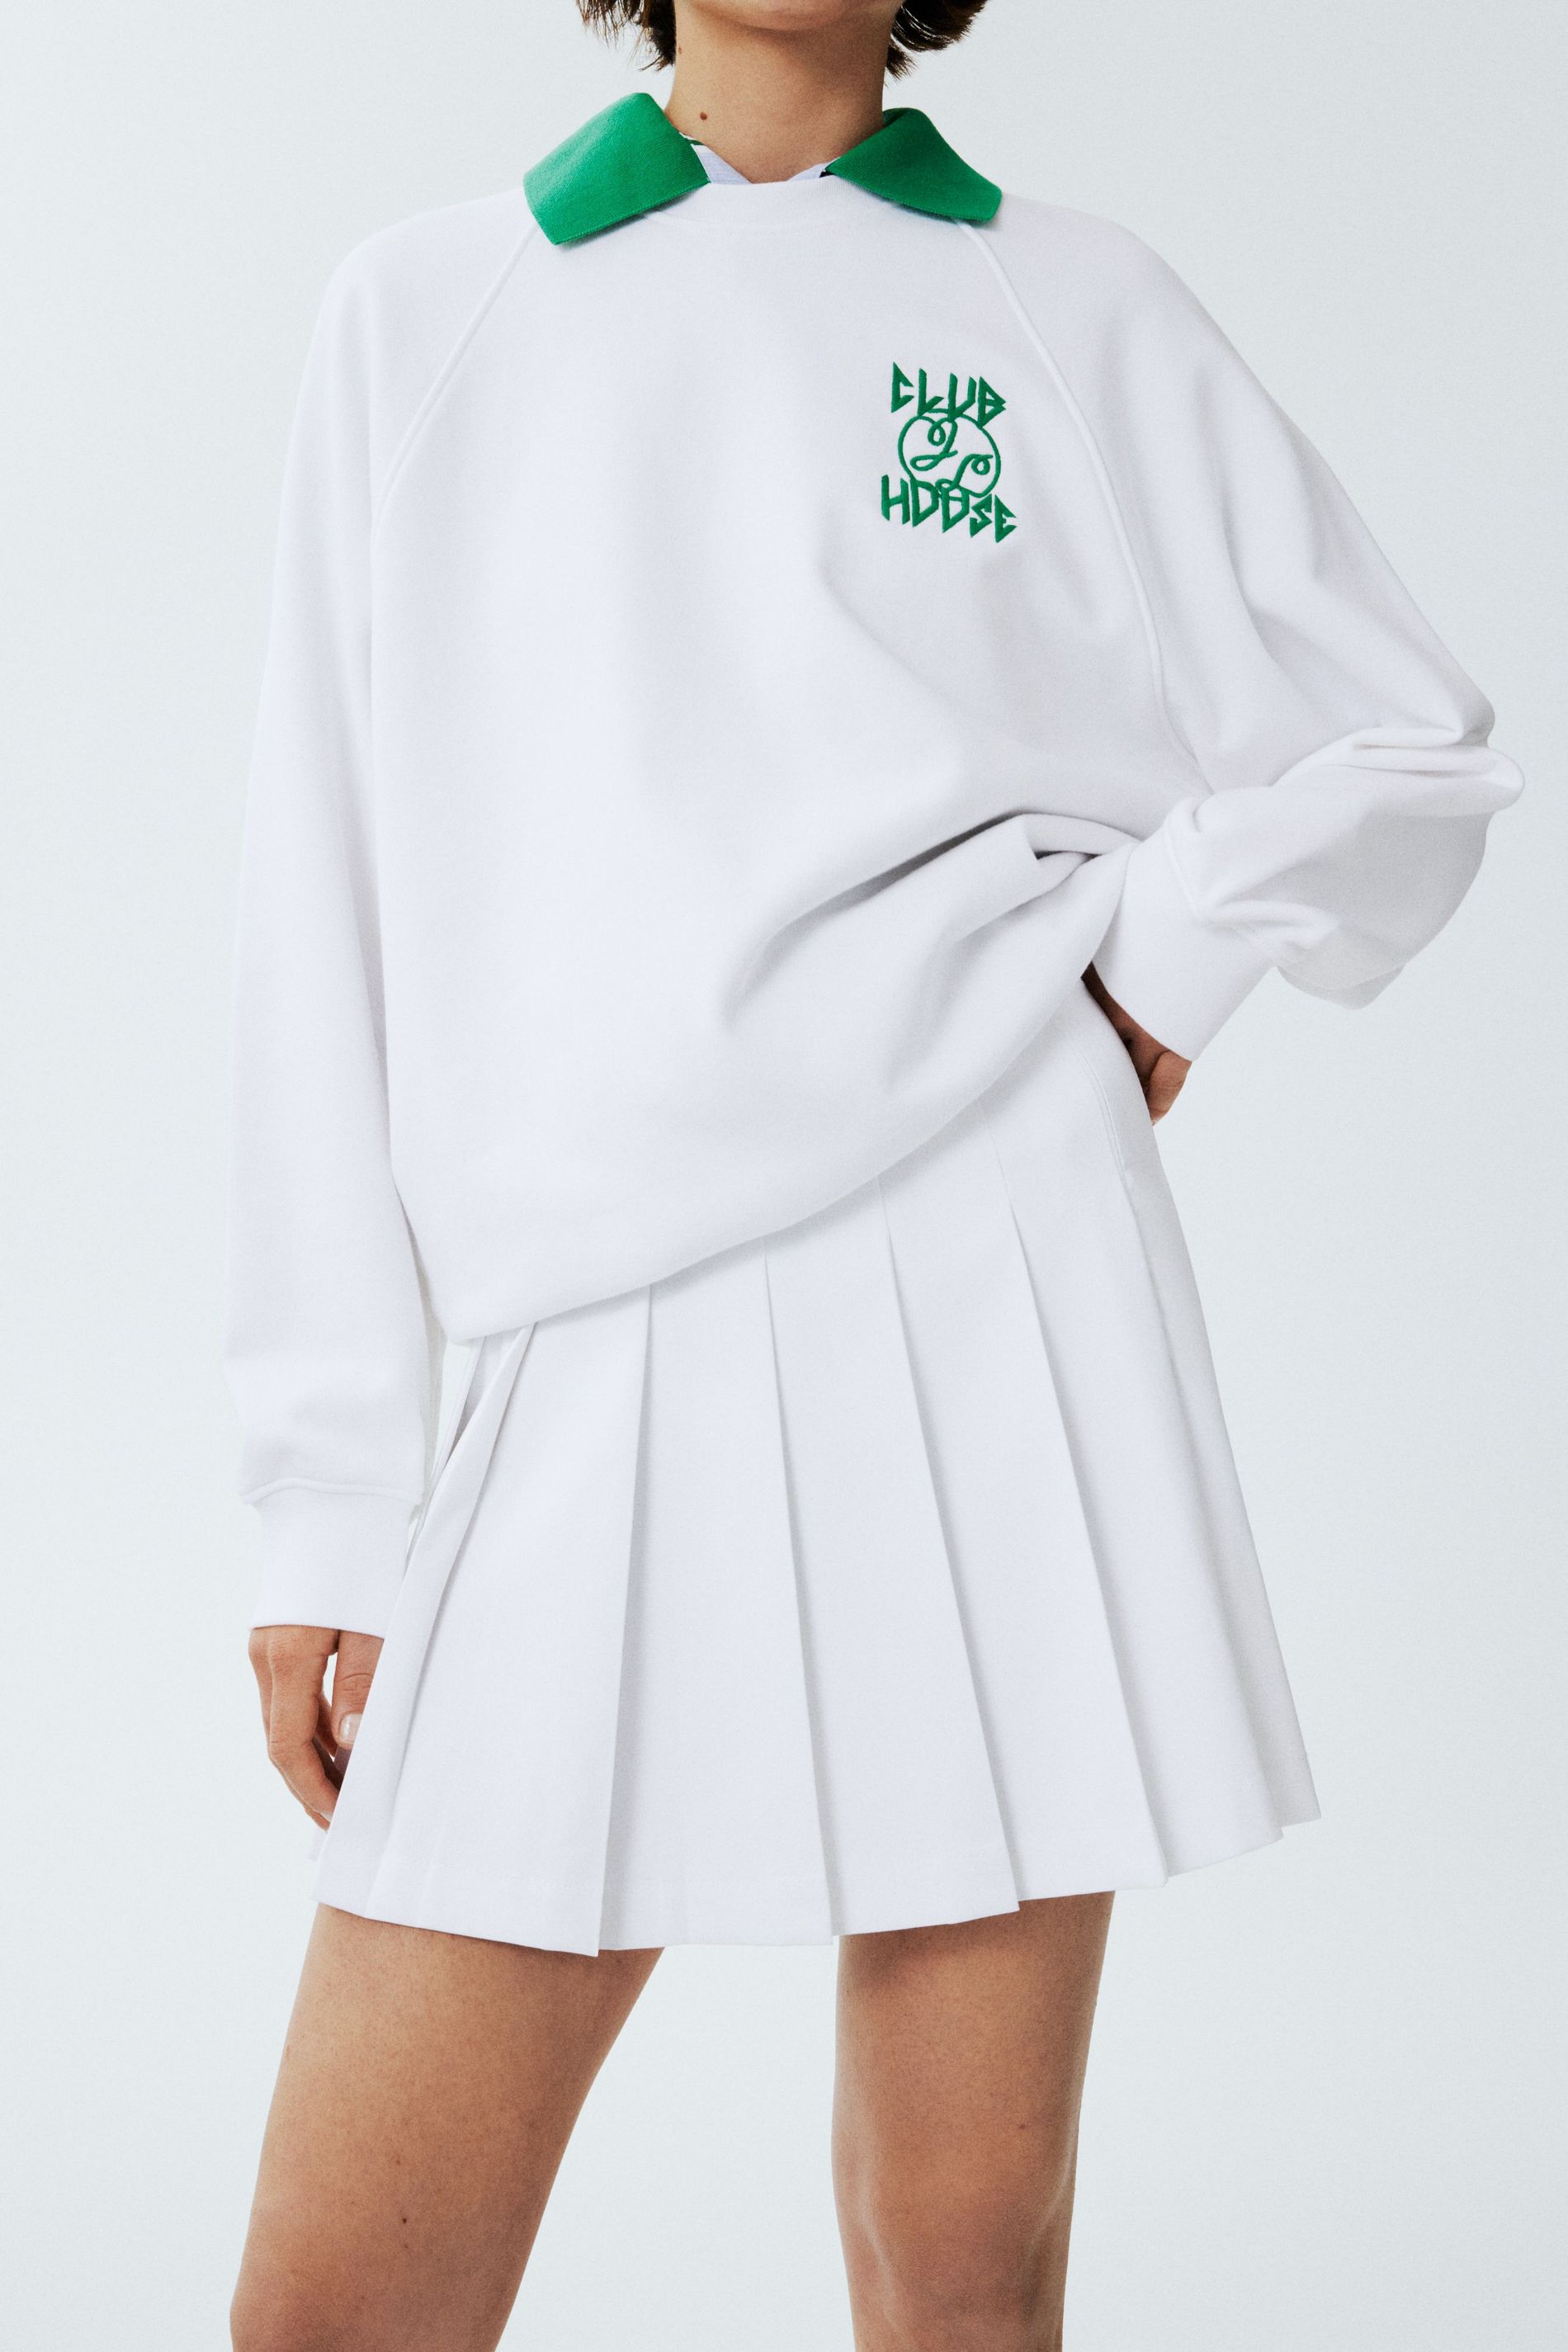 A white collared sweatshirt with green details and a white pleated tennis skirt from J.Lindeberg's Tennis 2024 collection